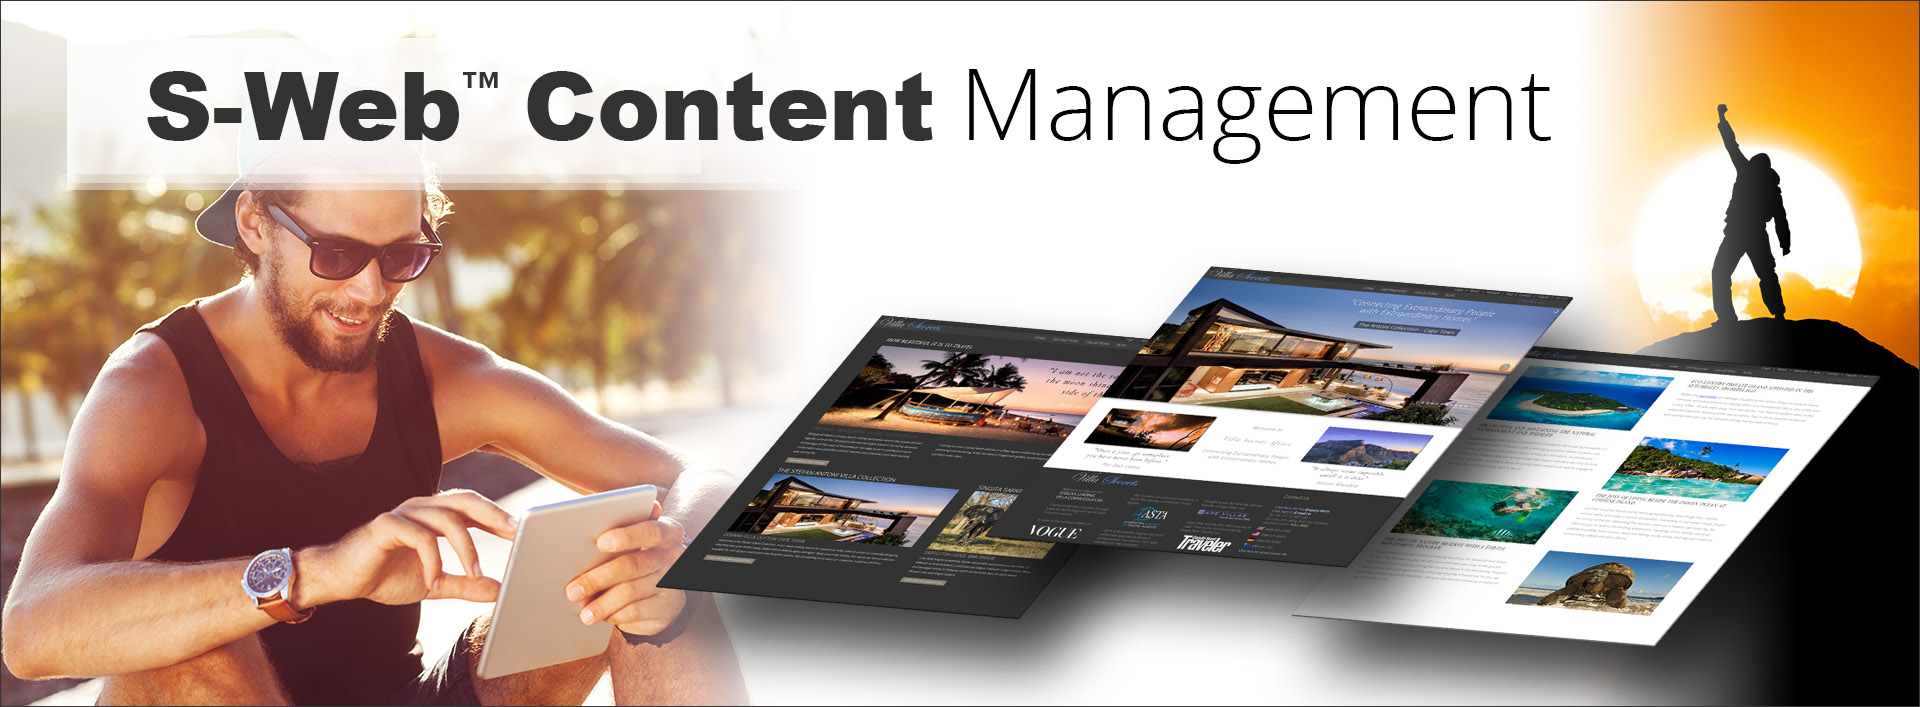 S-Web-Content-Management__THE-WHAT